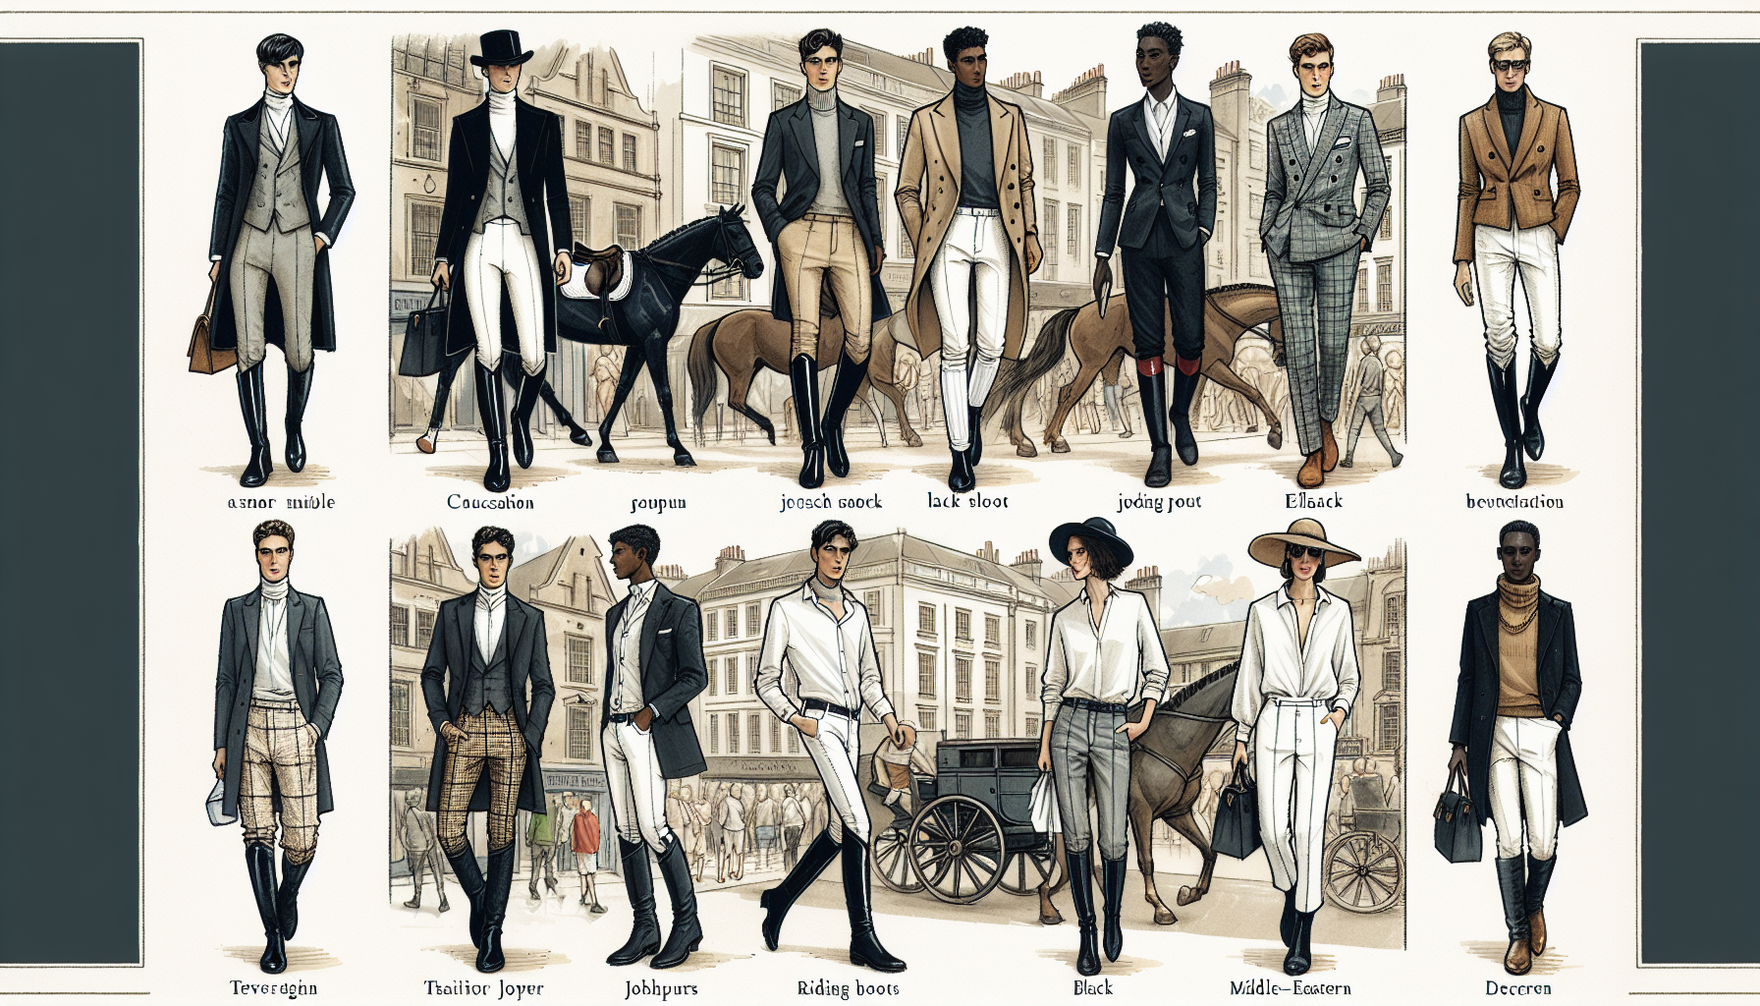 An illustrated interpretation of how equestrian style permeates everyday fashion. Visualize an array of modern outfits inspired by traditional equestrian attire, depicting stylish individuals on a cit